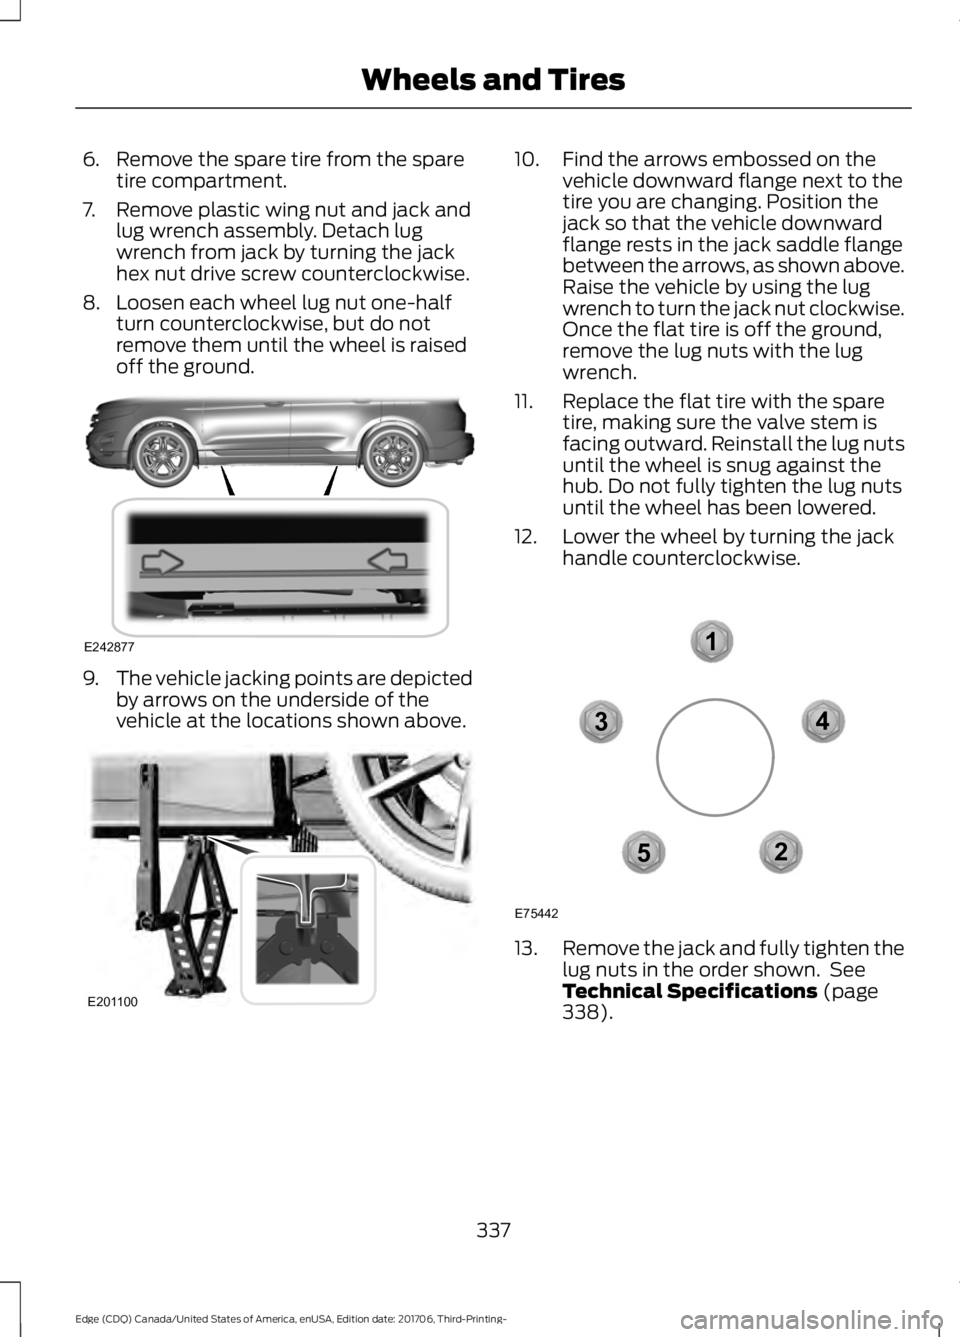 FORD EDGE 2018  Owners Manual 6. Remove the spare tire from the spare
tire compartment.
7. Remove plastic wing nut and jack and lug wrench assembly. Detach lug
wrench from jack by turning the jack
hex nut drive screw counterclockw